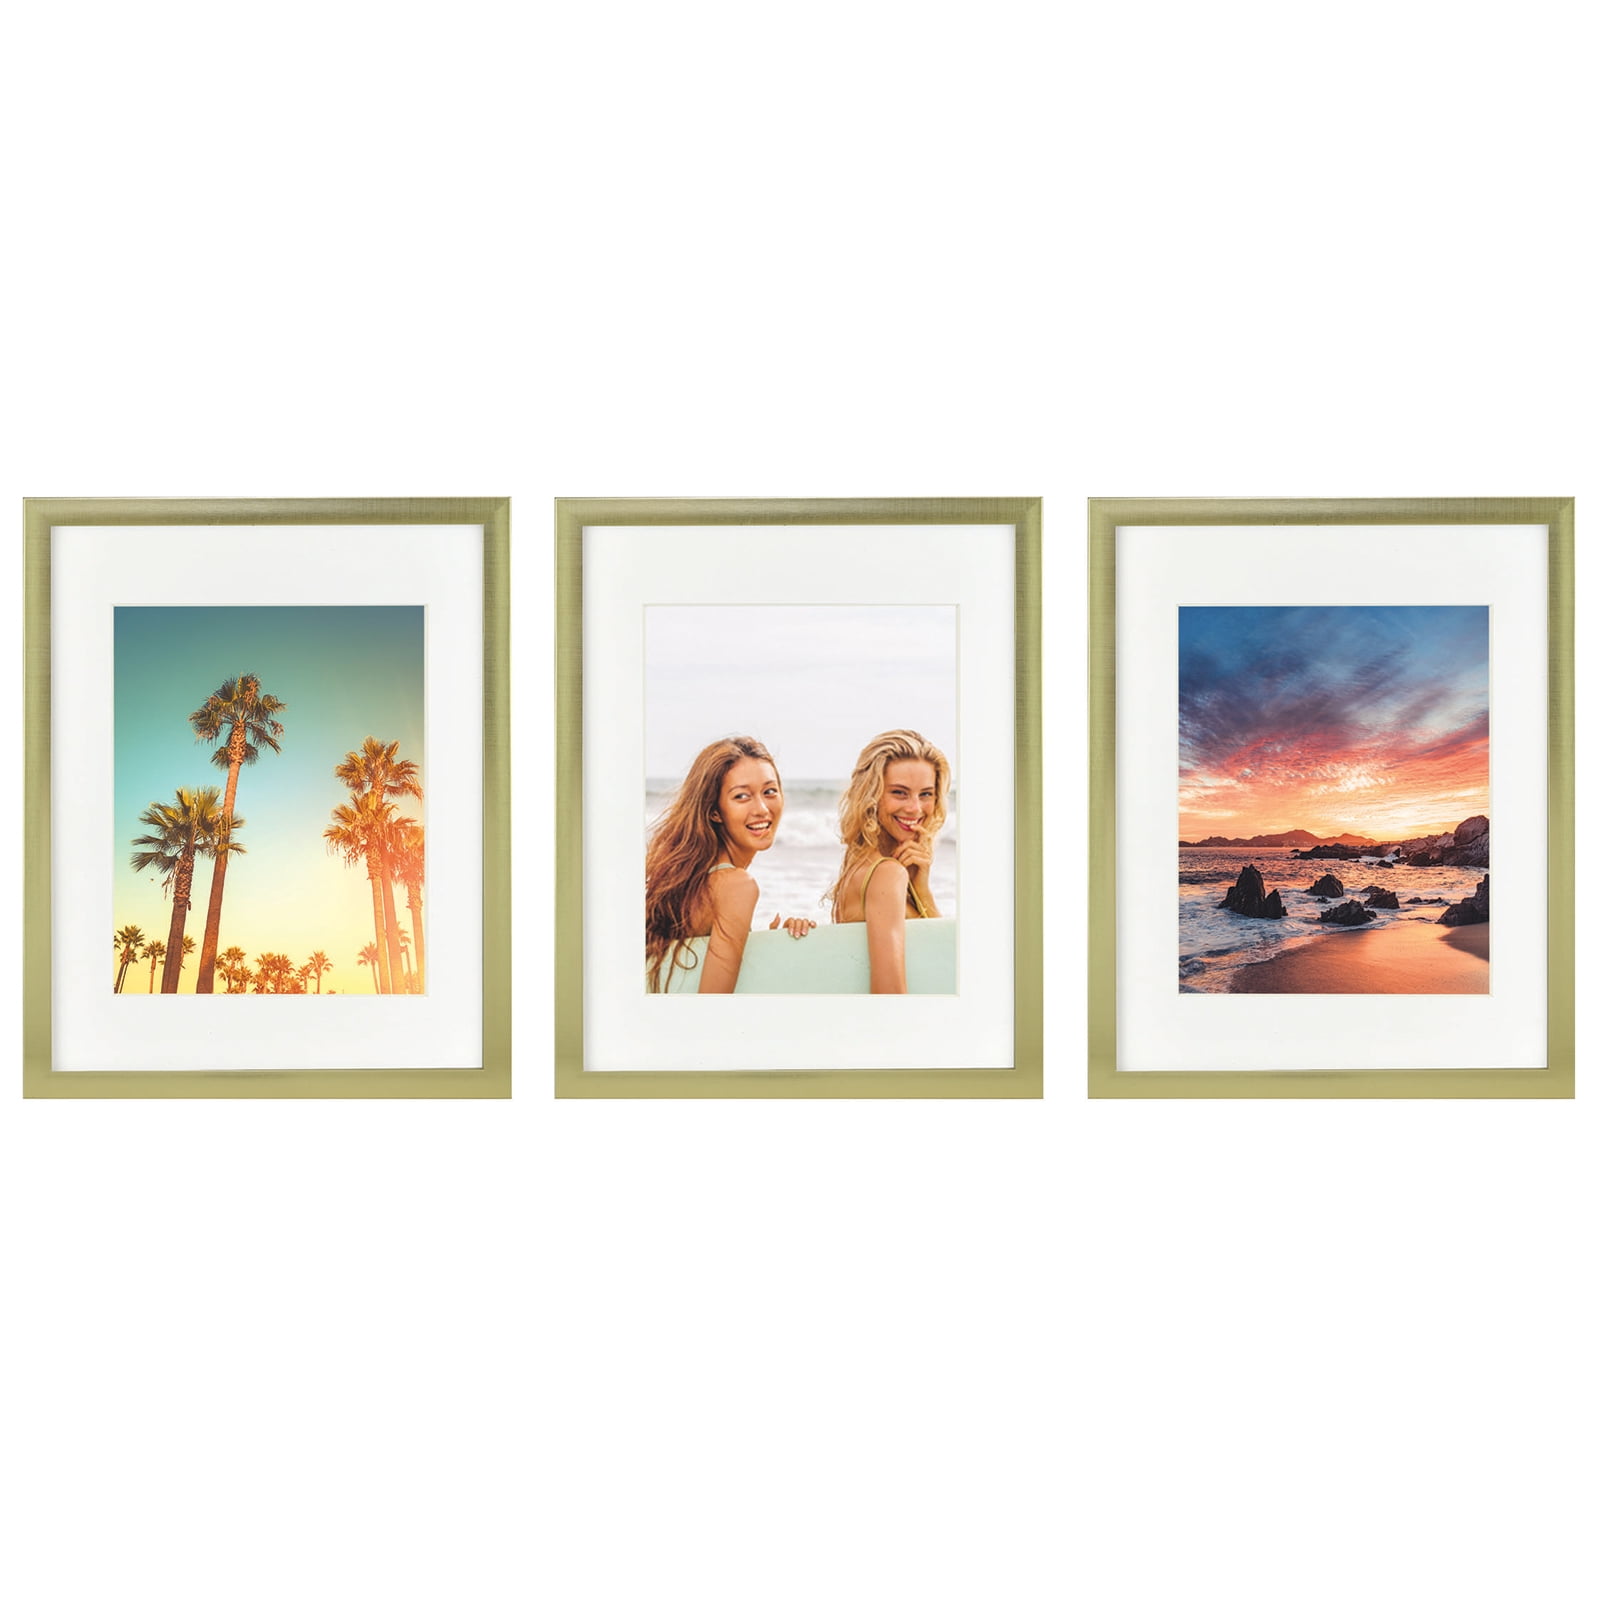 upsimples 11x14 Picture Frame Set of 5,Display Pictures 8x10 with Mat or  11x14 Without Mat,Wall Gallery Photo Frames,White